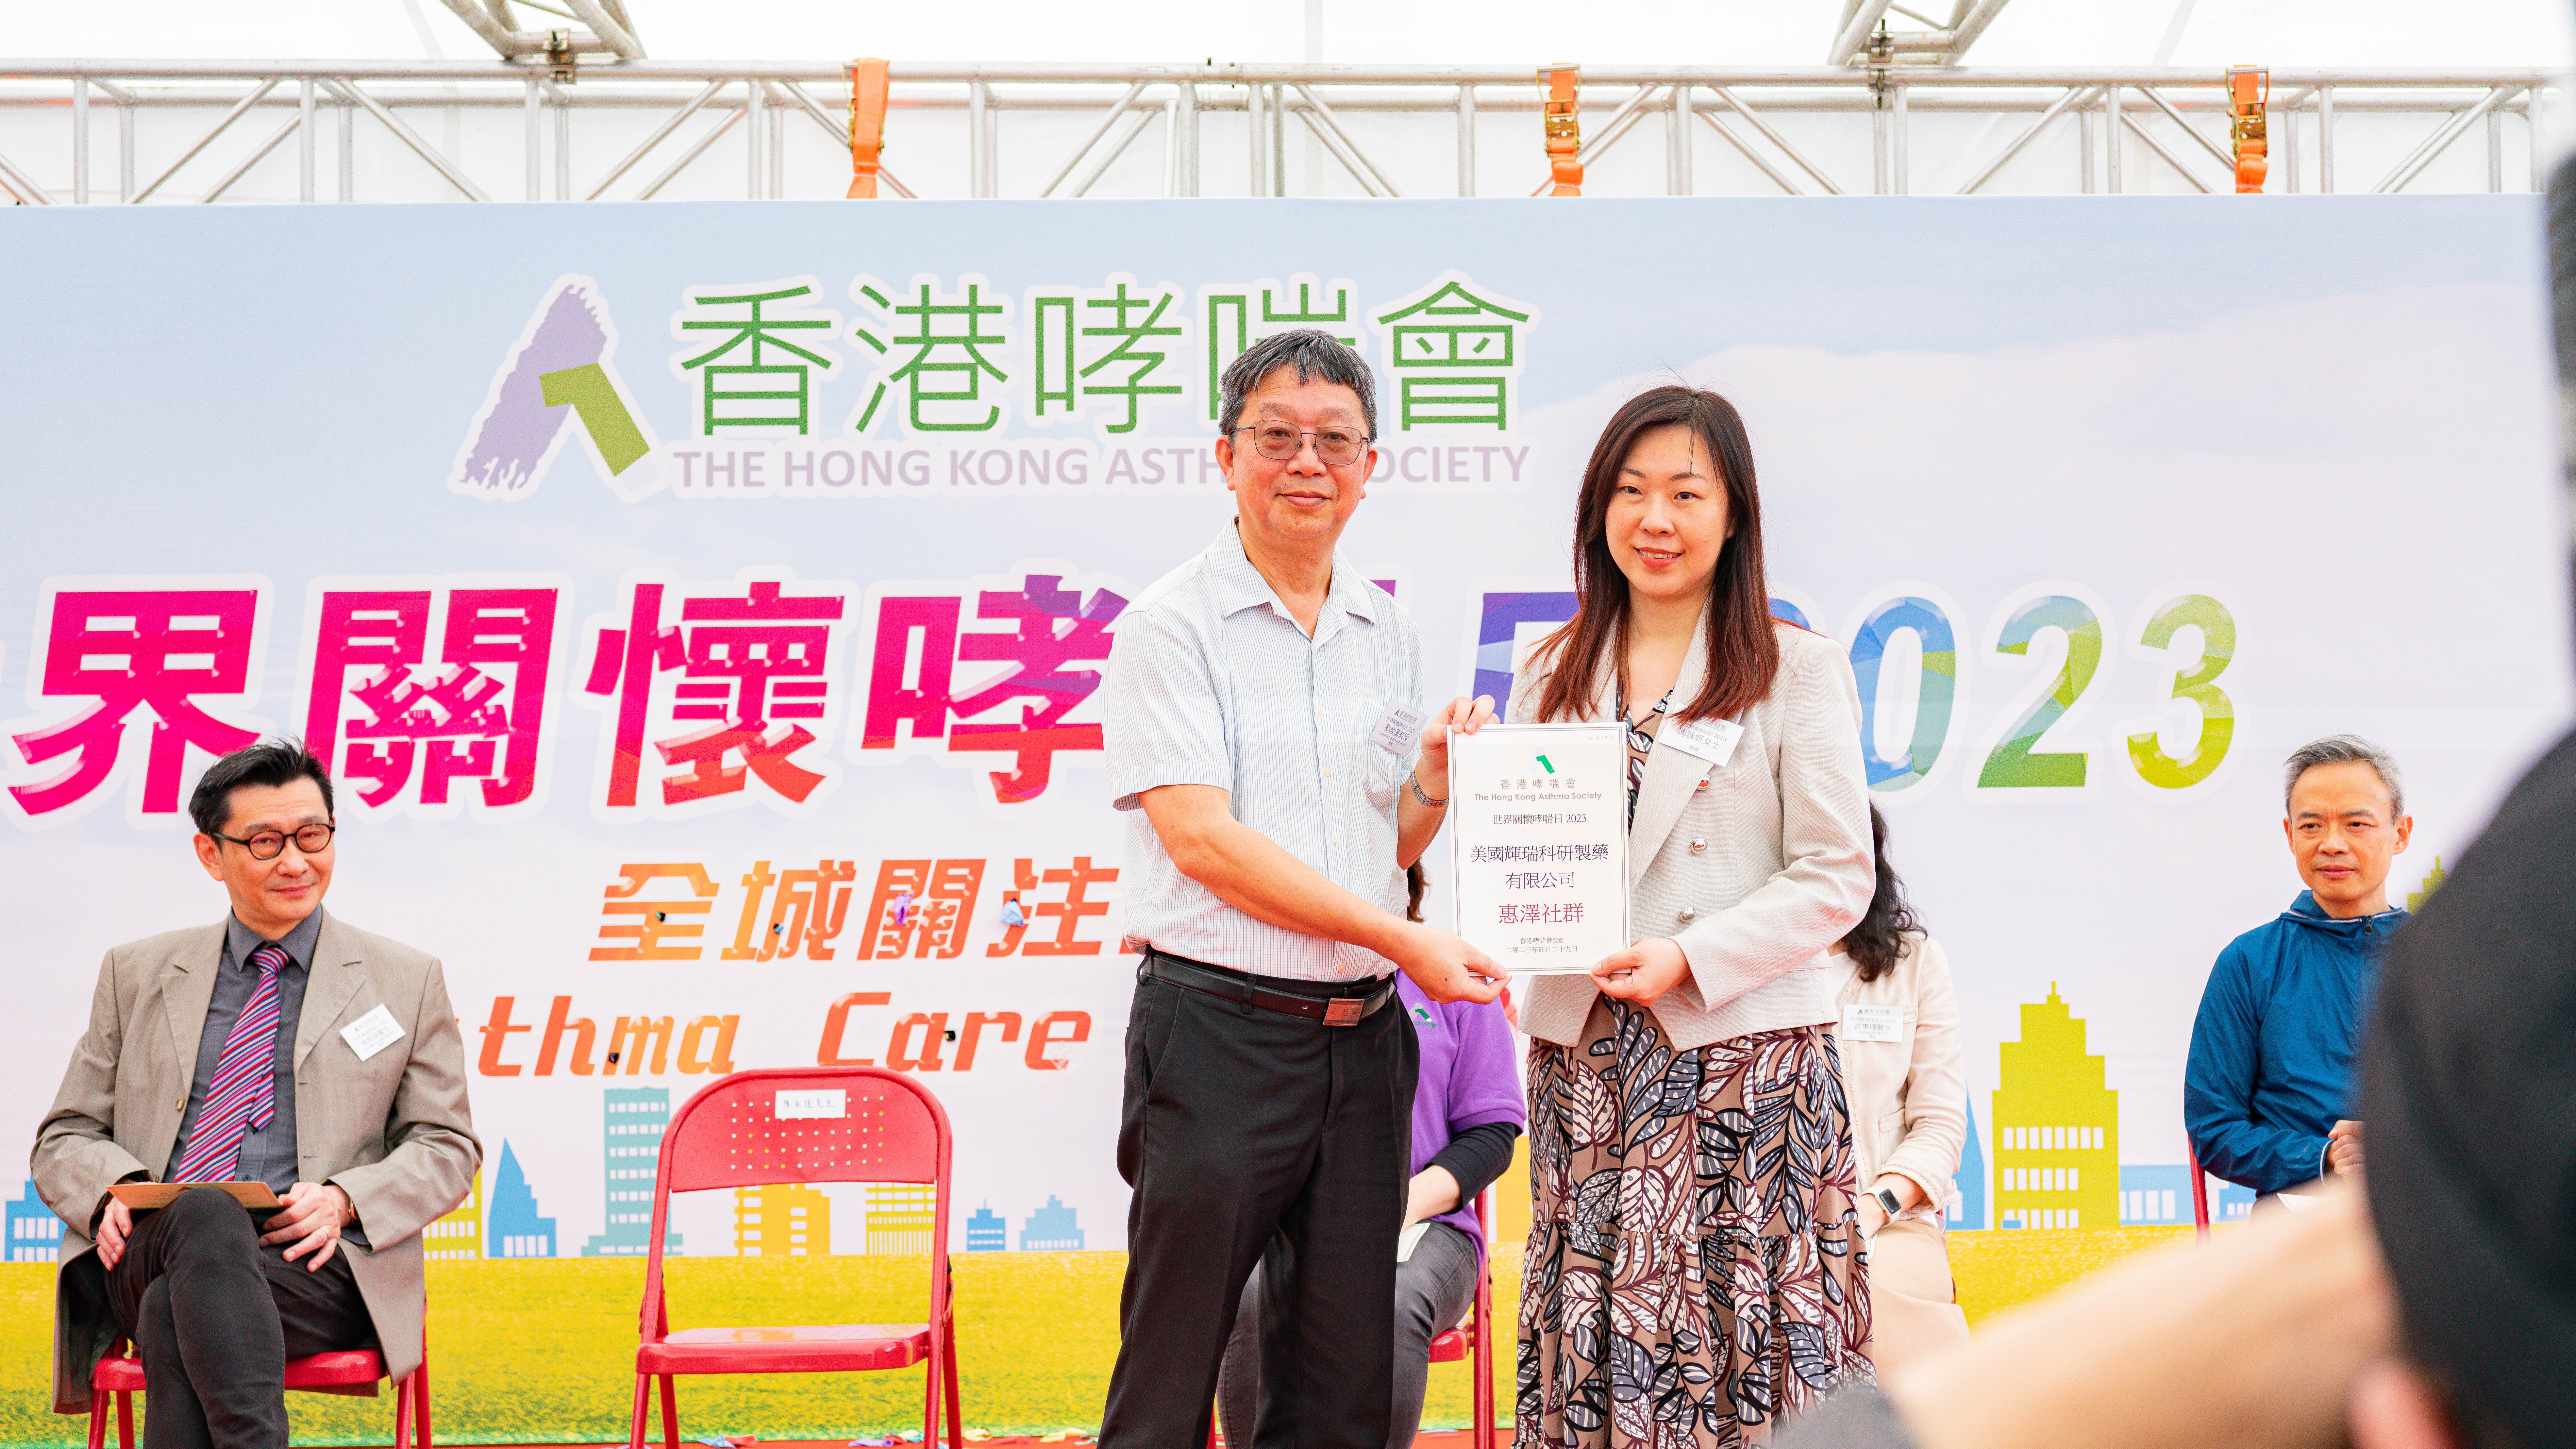 Prof. Alexis Lau was invited as a guest of honor